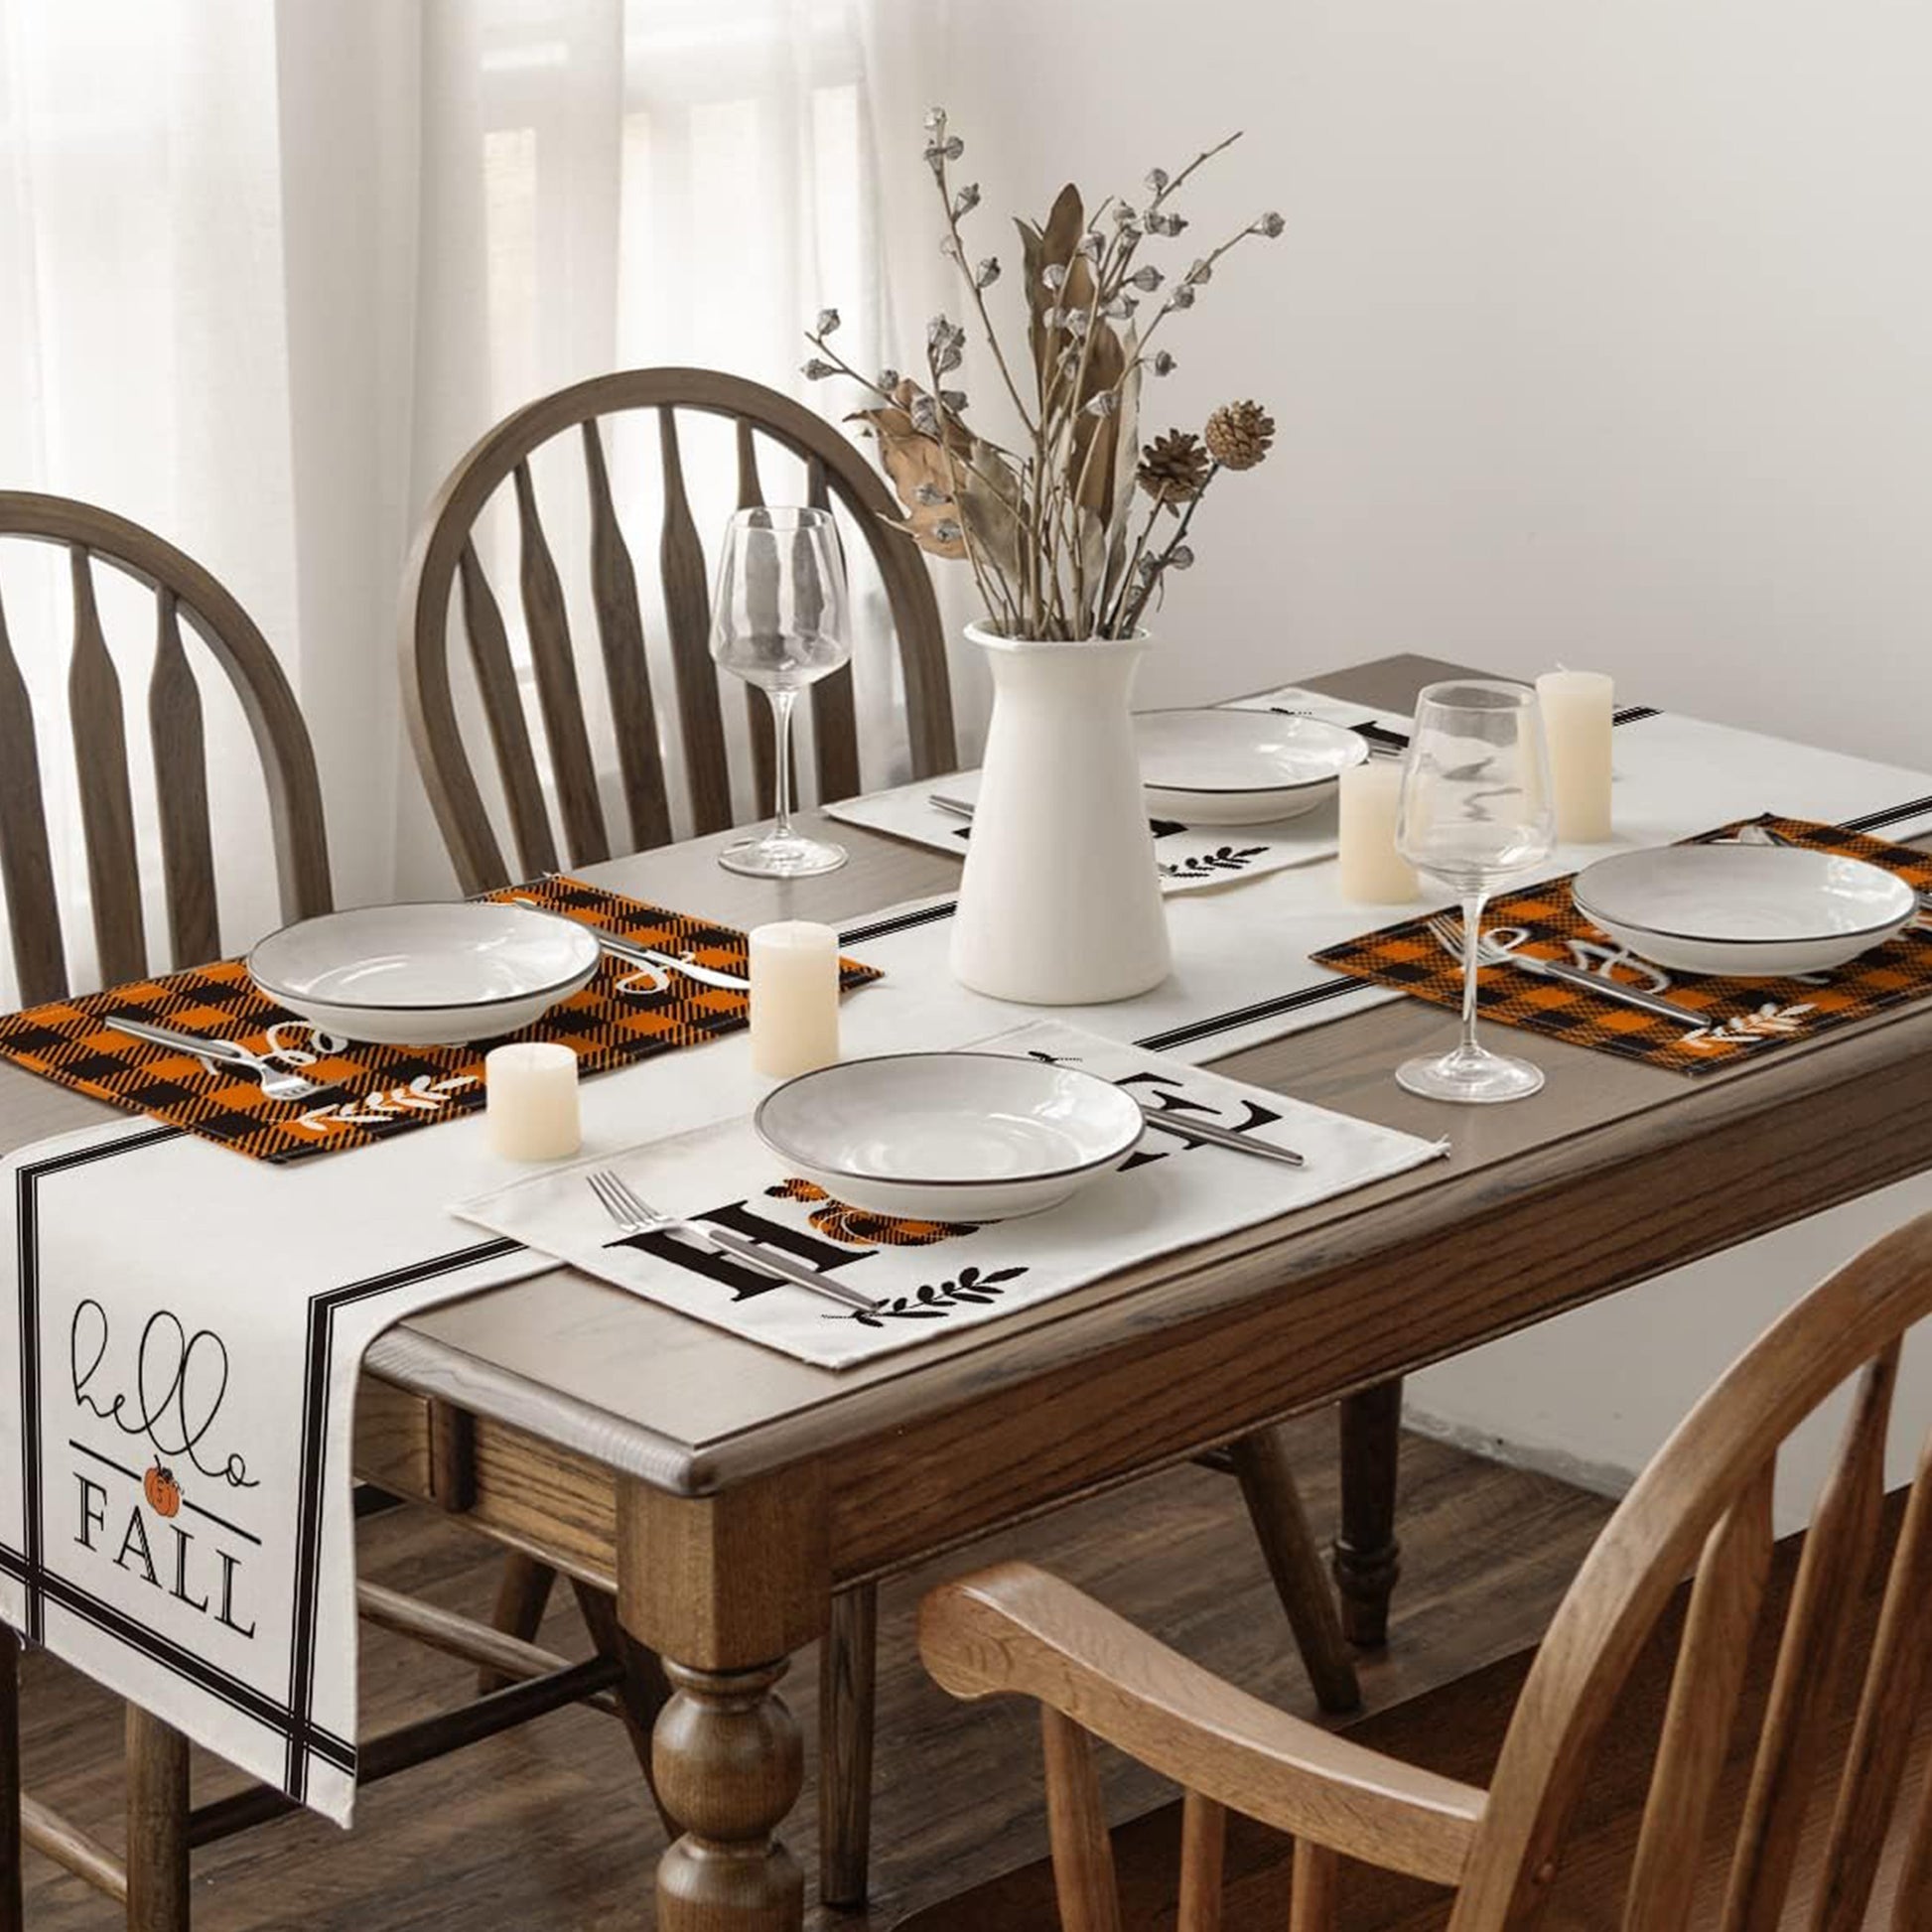 Give Thanks (Thanksgiving themed) Christian Table Placemats -4pcs claimedbygoddesigns